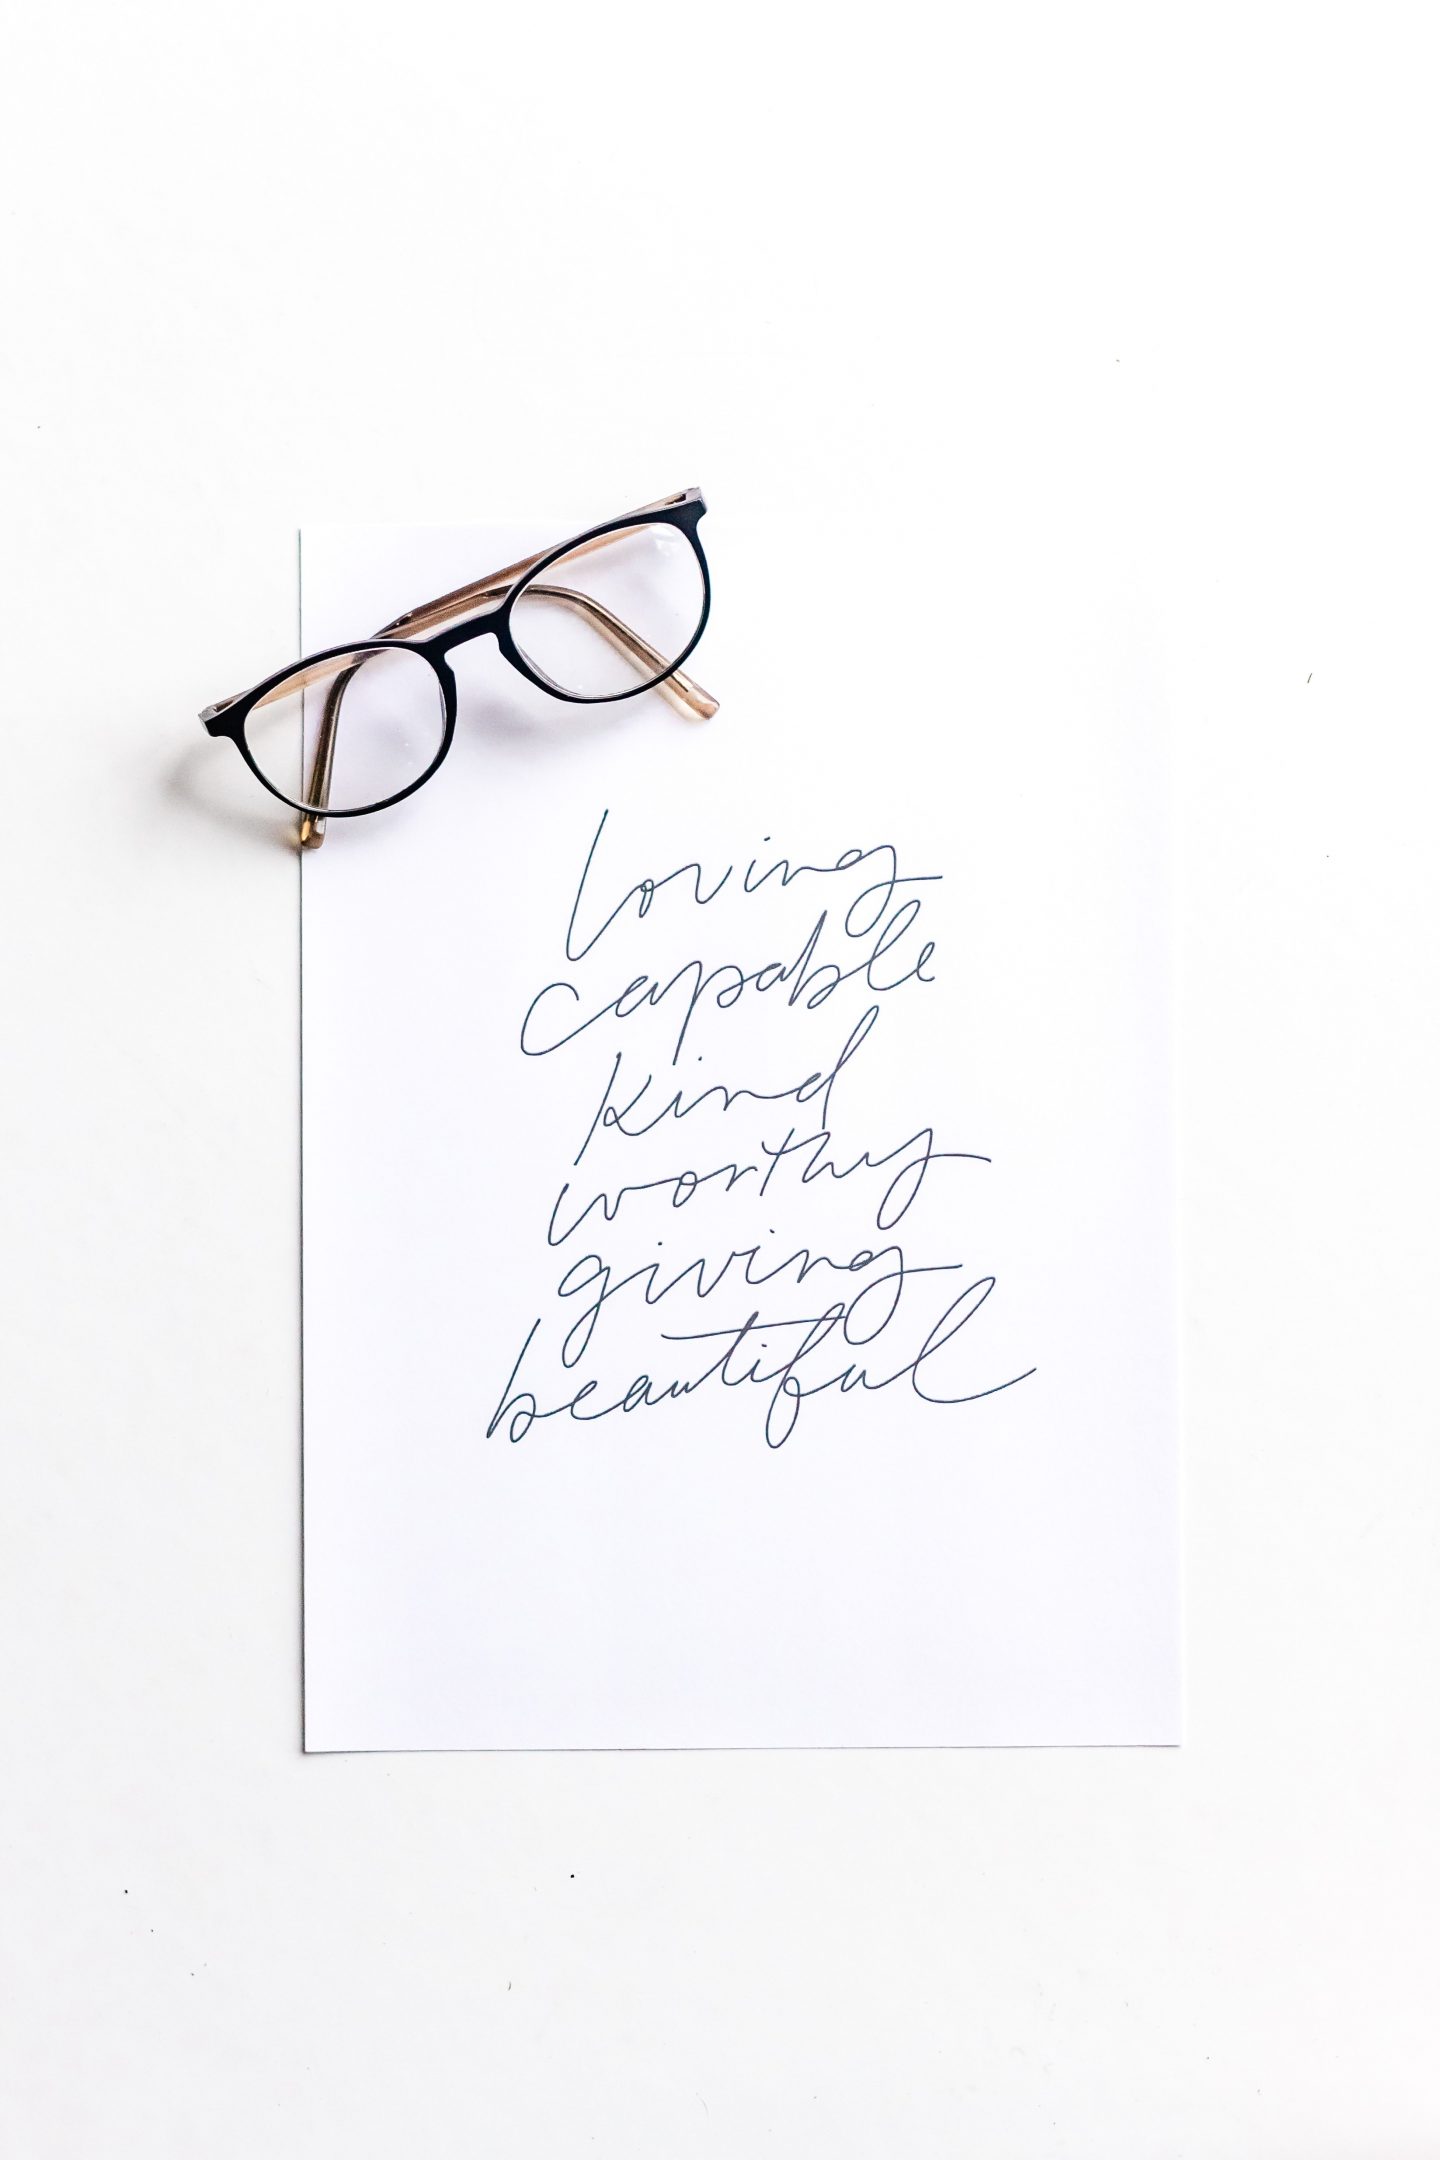 Life affirming words written on paper with a pair of glasses